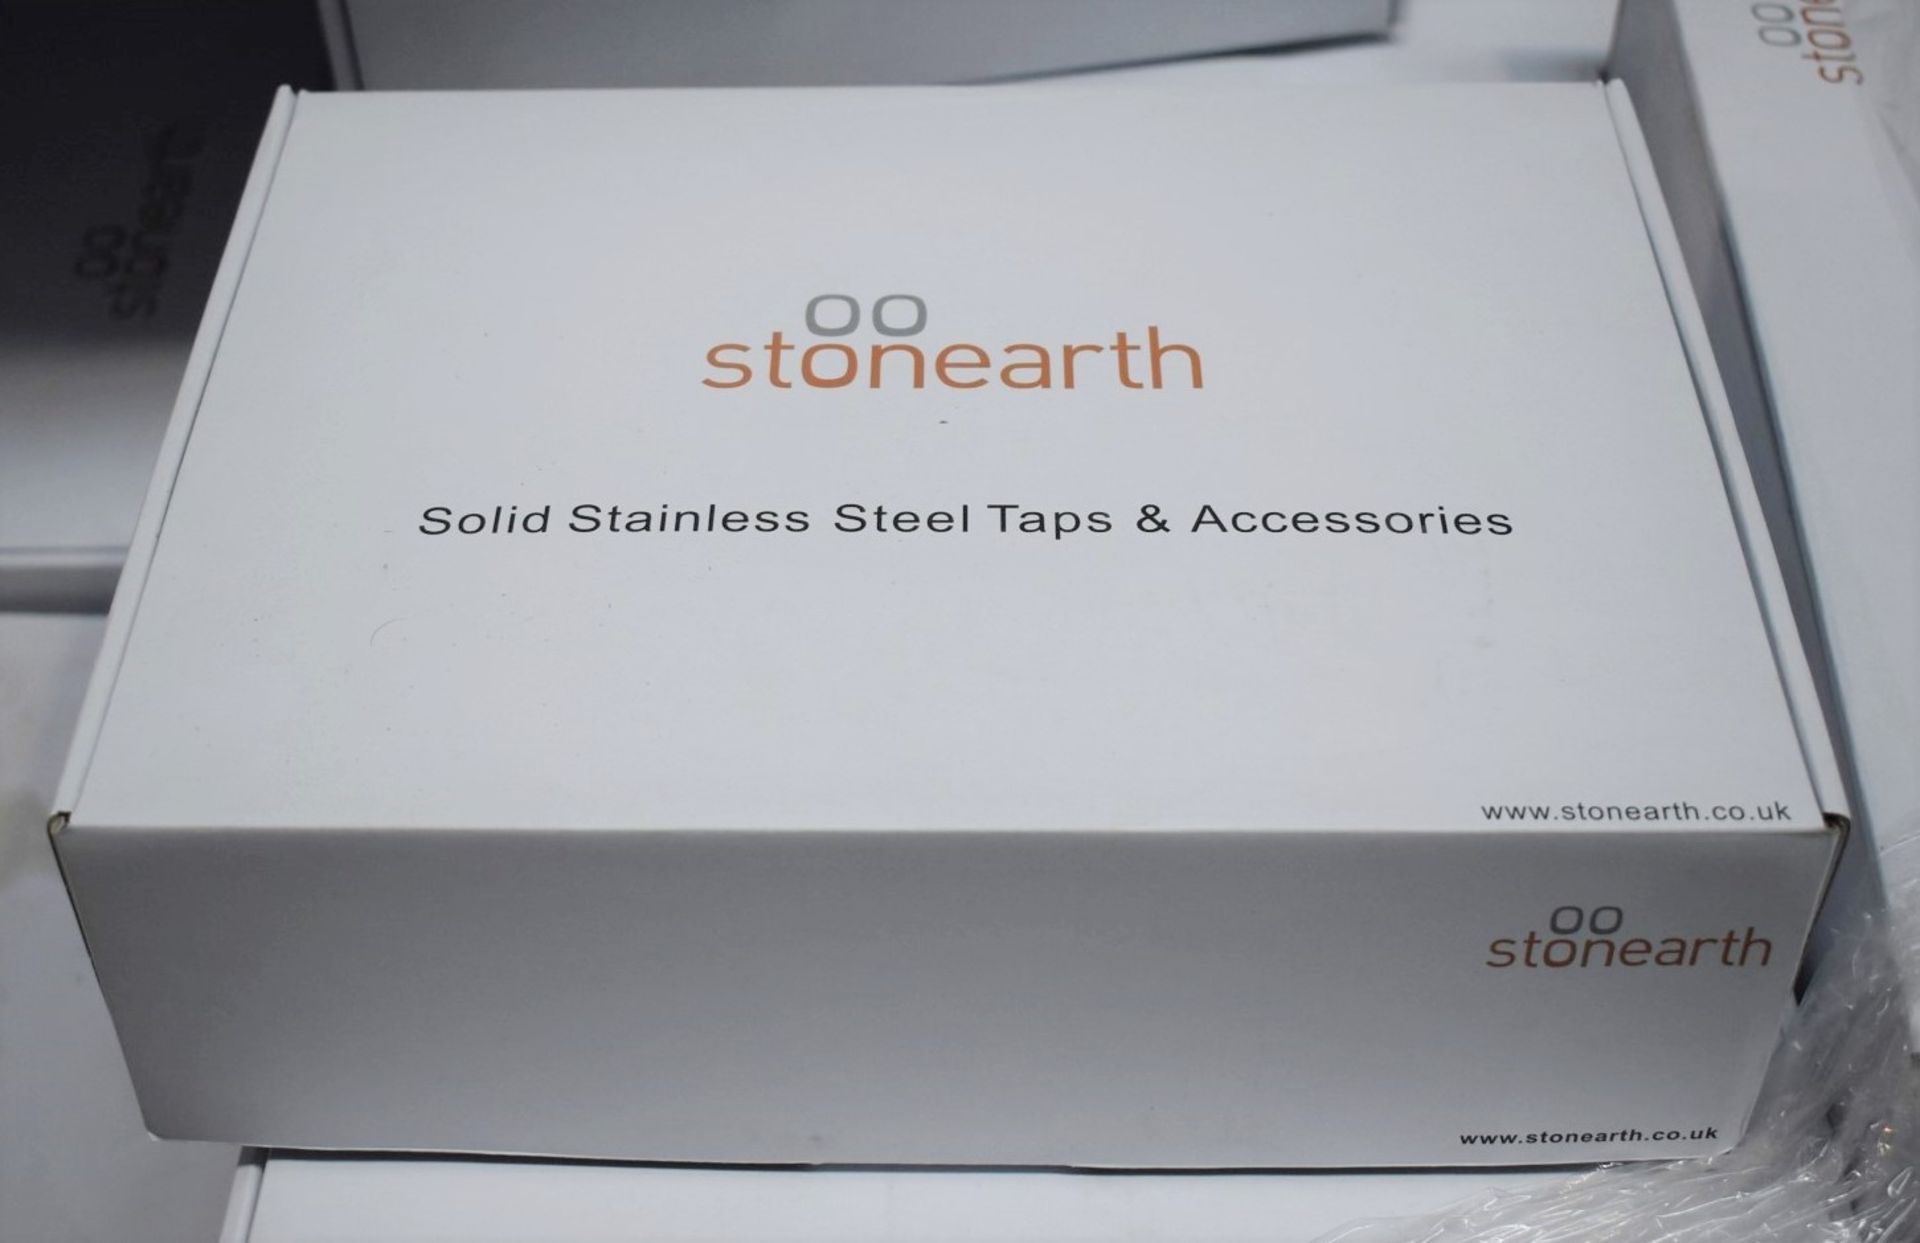 1 x Stonearth 'Metro' Stainless Steel Basin Mixer Tap - Brand New & Boxed - RRP £245 - Ref: TP821 - Image 10 of 13